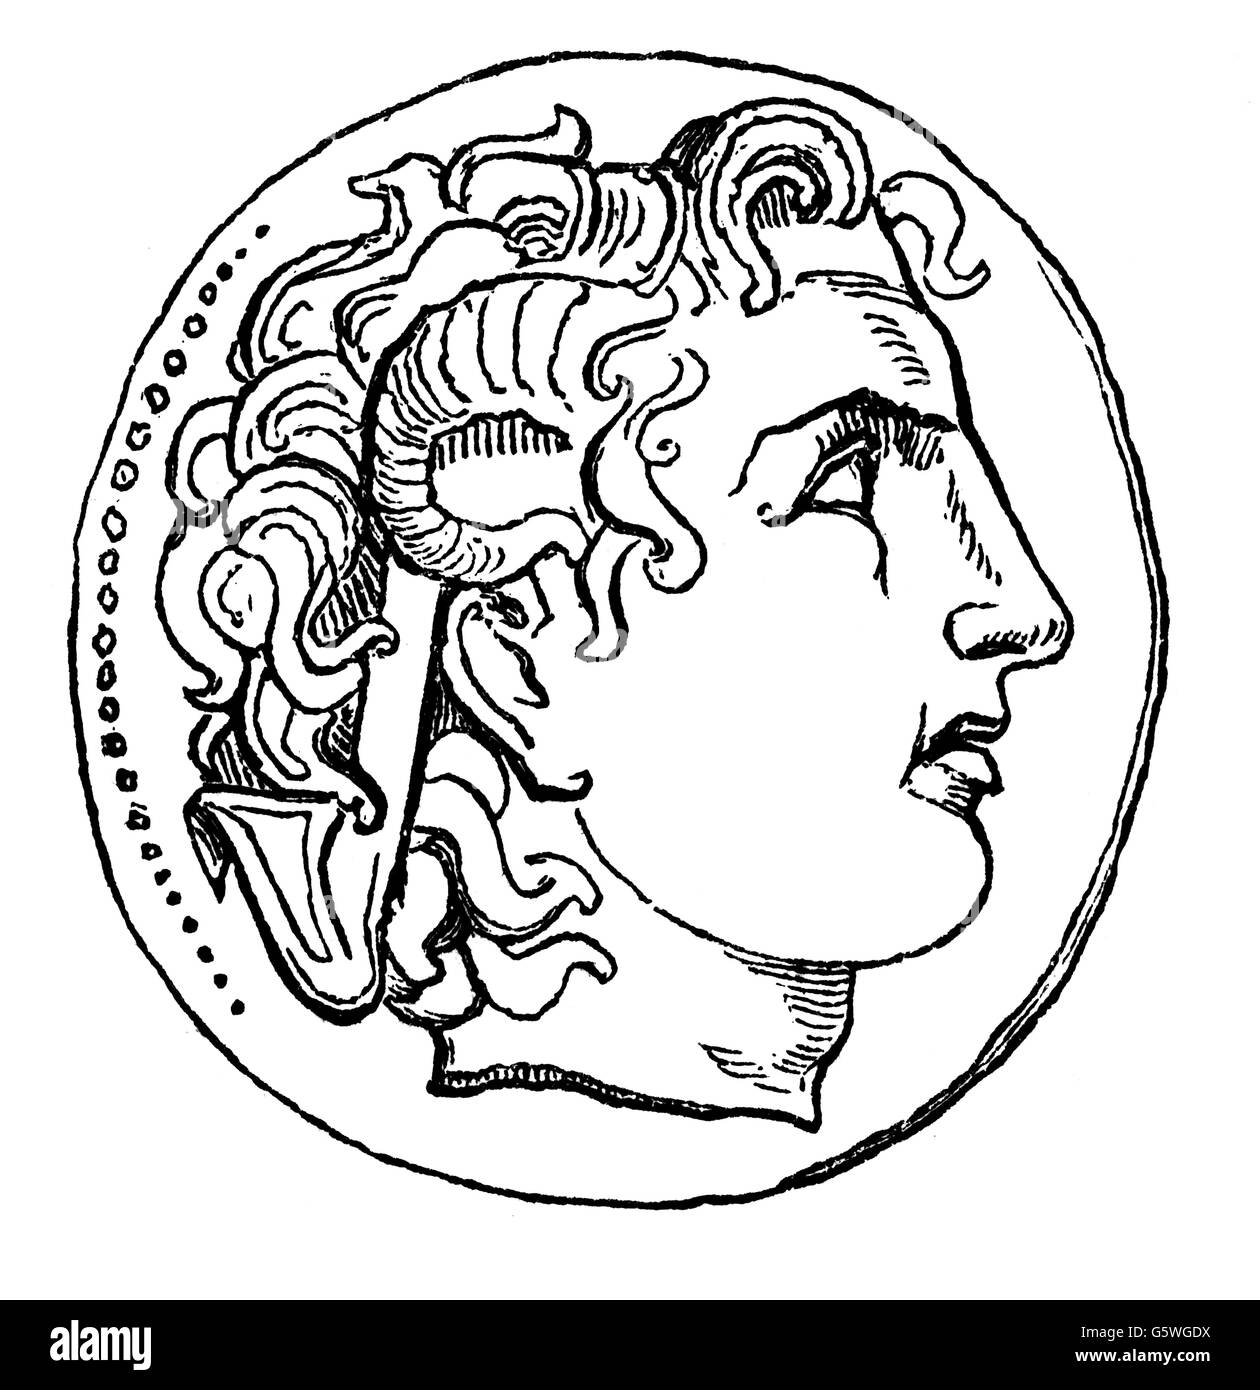 money / finances, coins, Greece, coin, with head of Alexander Great as Zeus Ammon, coined by Lysimachus, Thrace, 4th century BC, wood engraving,  from: book of inventions, trades and industries, Otto Spamer publishing house, Leipzig - Berlin, 1864 - 1867, Additional-Rights-Clearences-Not Available Stock Photo